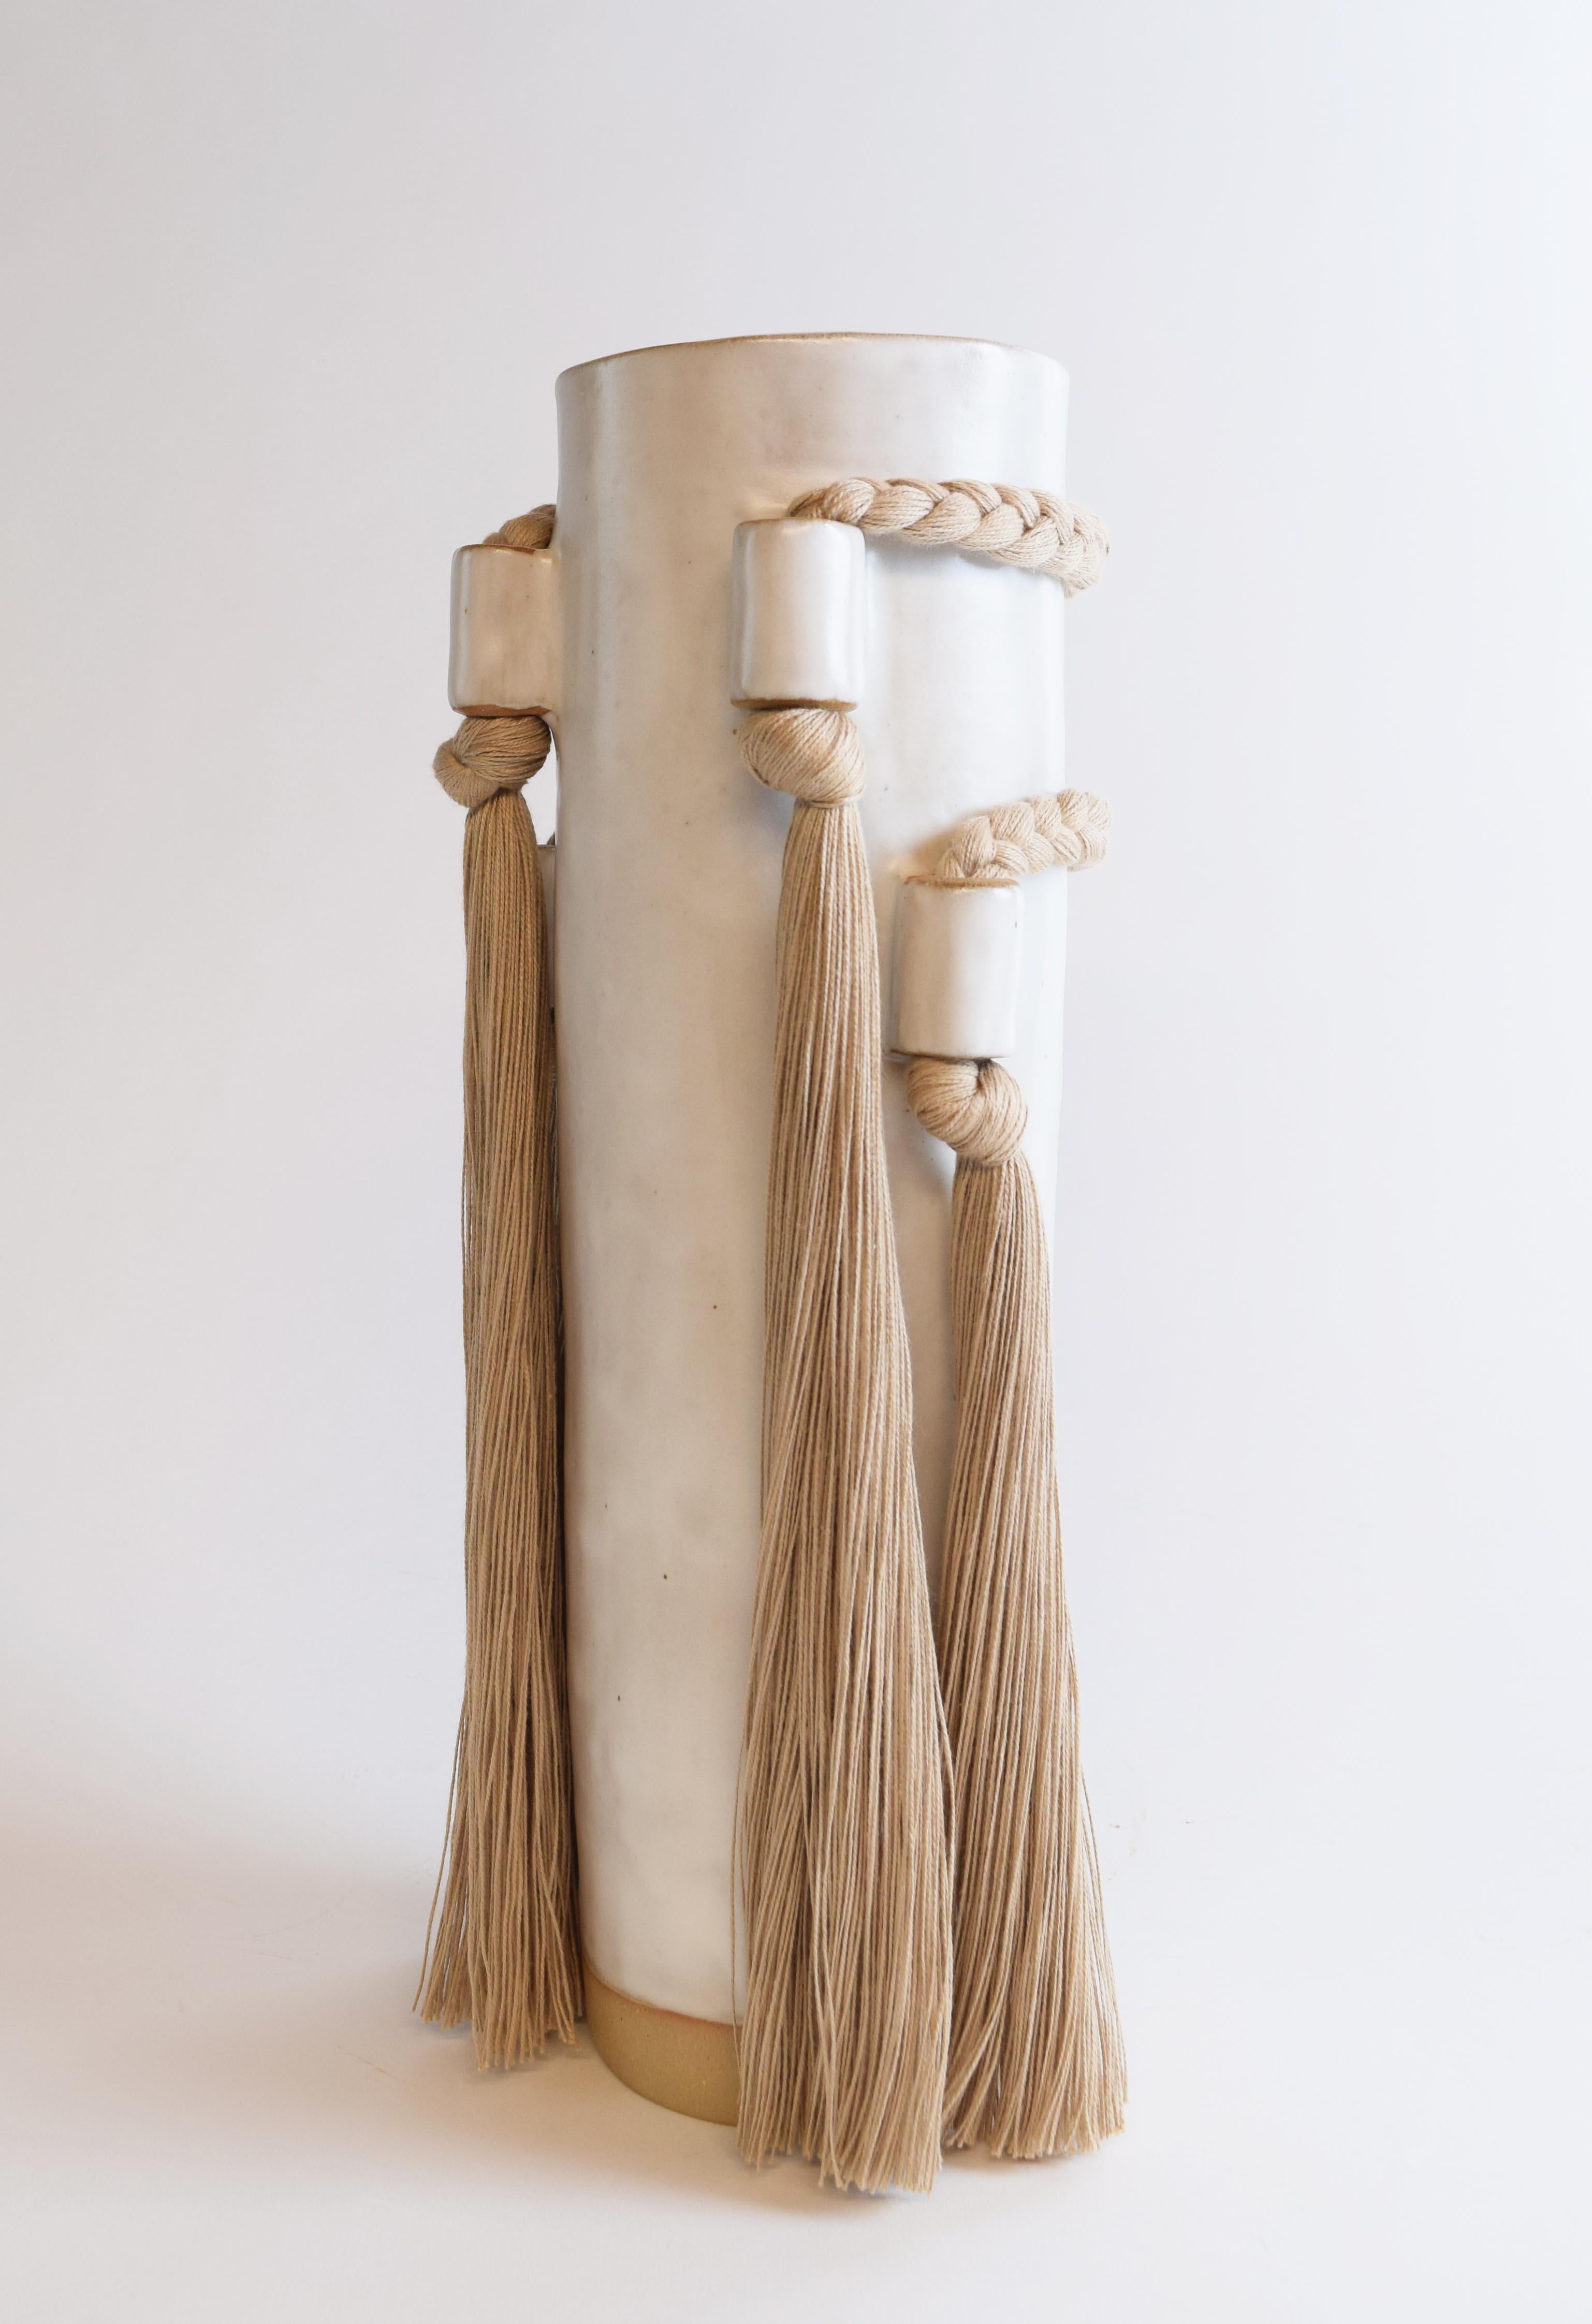 Vase #735 by Karen Gayle Tinney

Featuring fringe and braided details from all views, this vase is sized to hold a large arrangement of flowers or to stand alone as a sculptural piece.

Hand formed stoneware with white glaze. Tan cotton braided